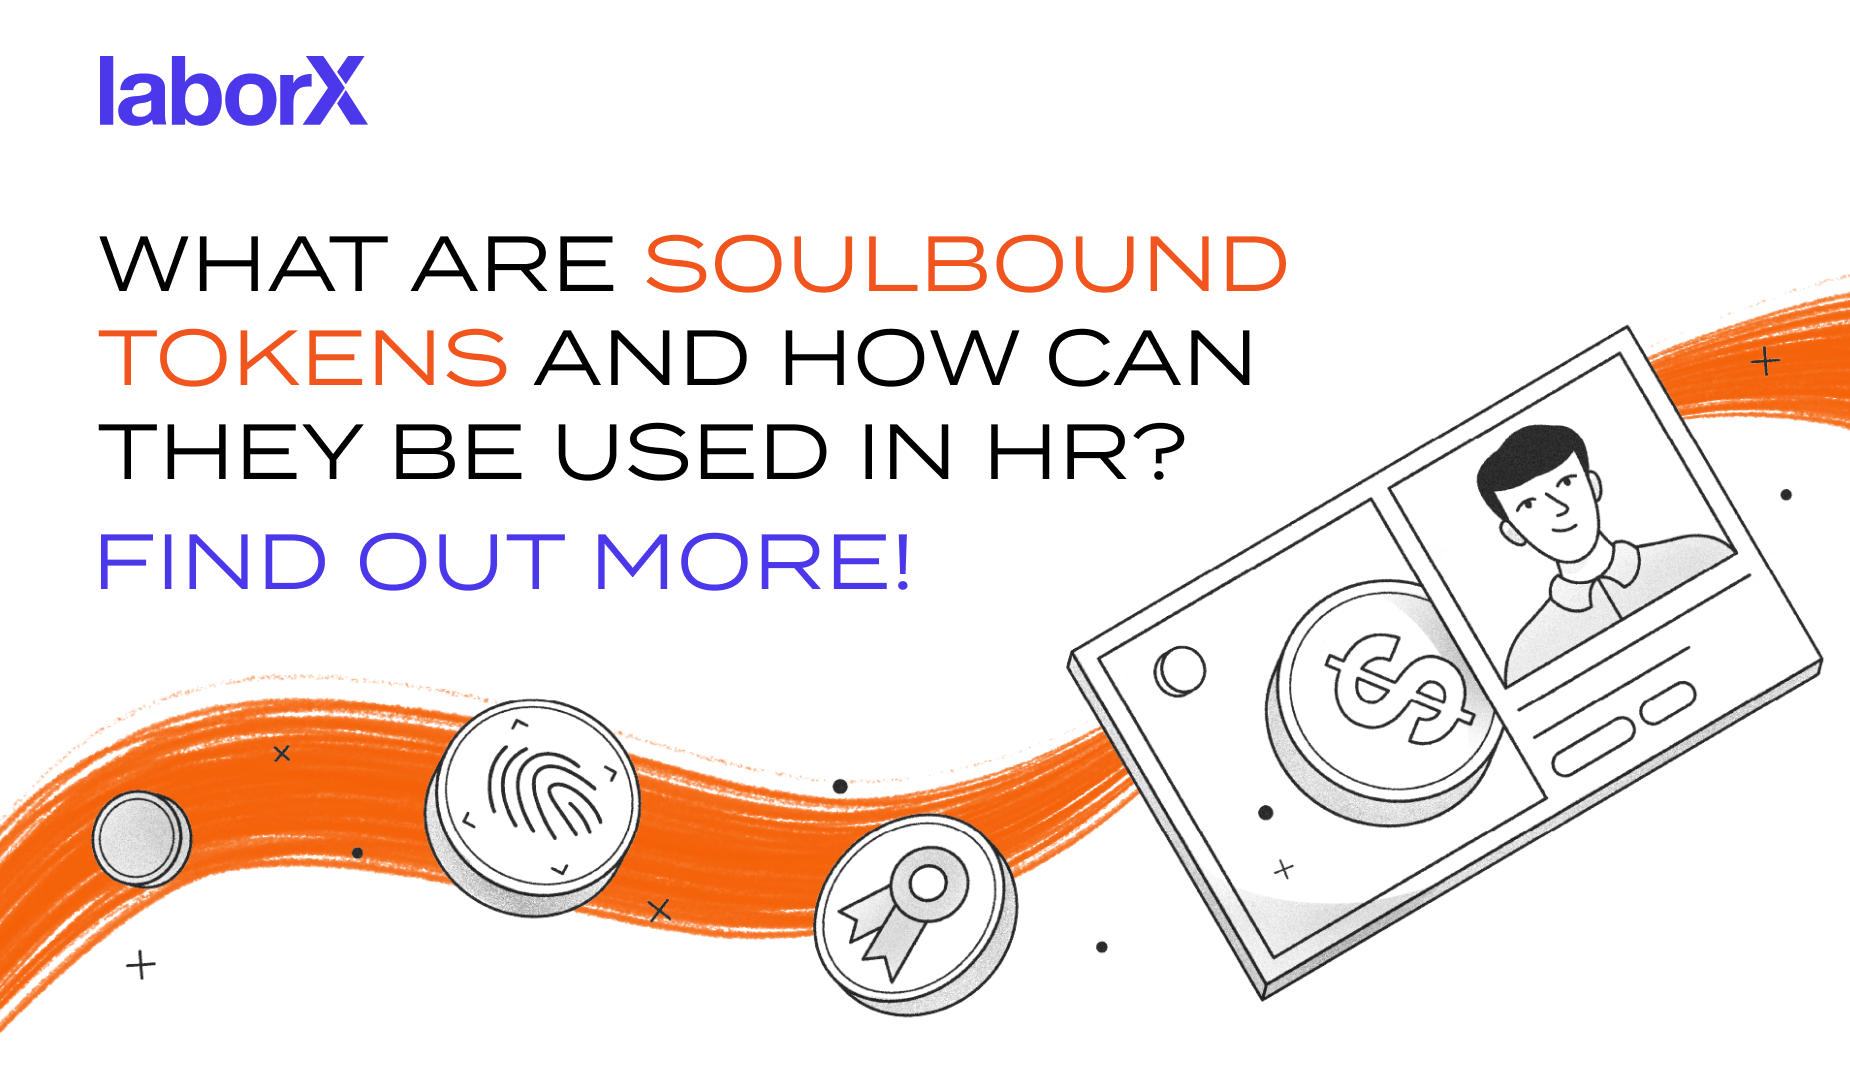 What Are Soulbound Tokens And How Can They Be Used In HR?